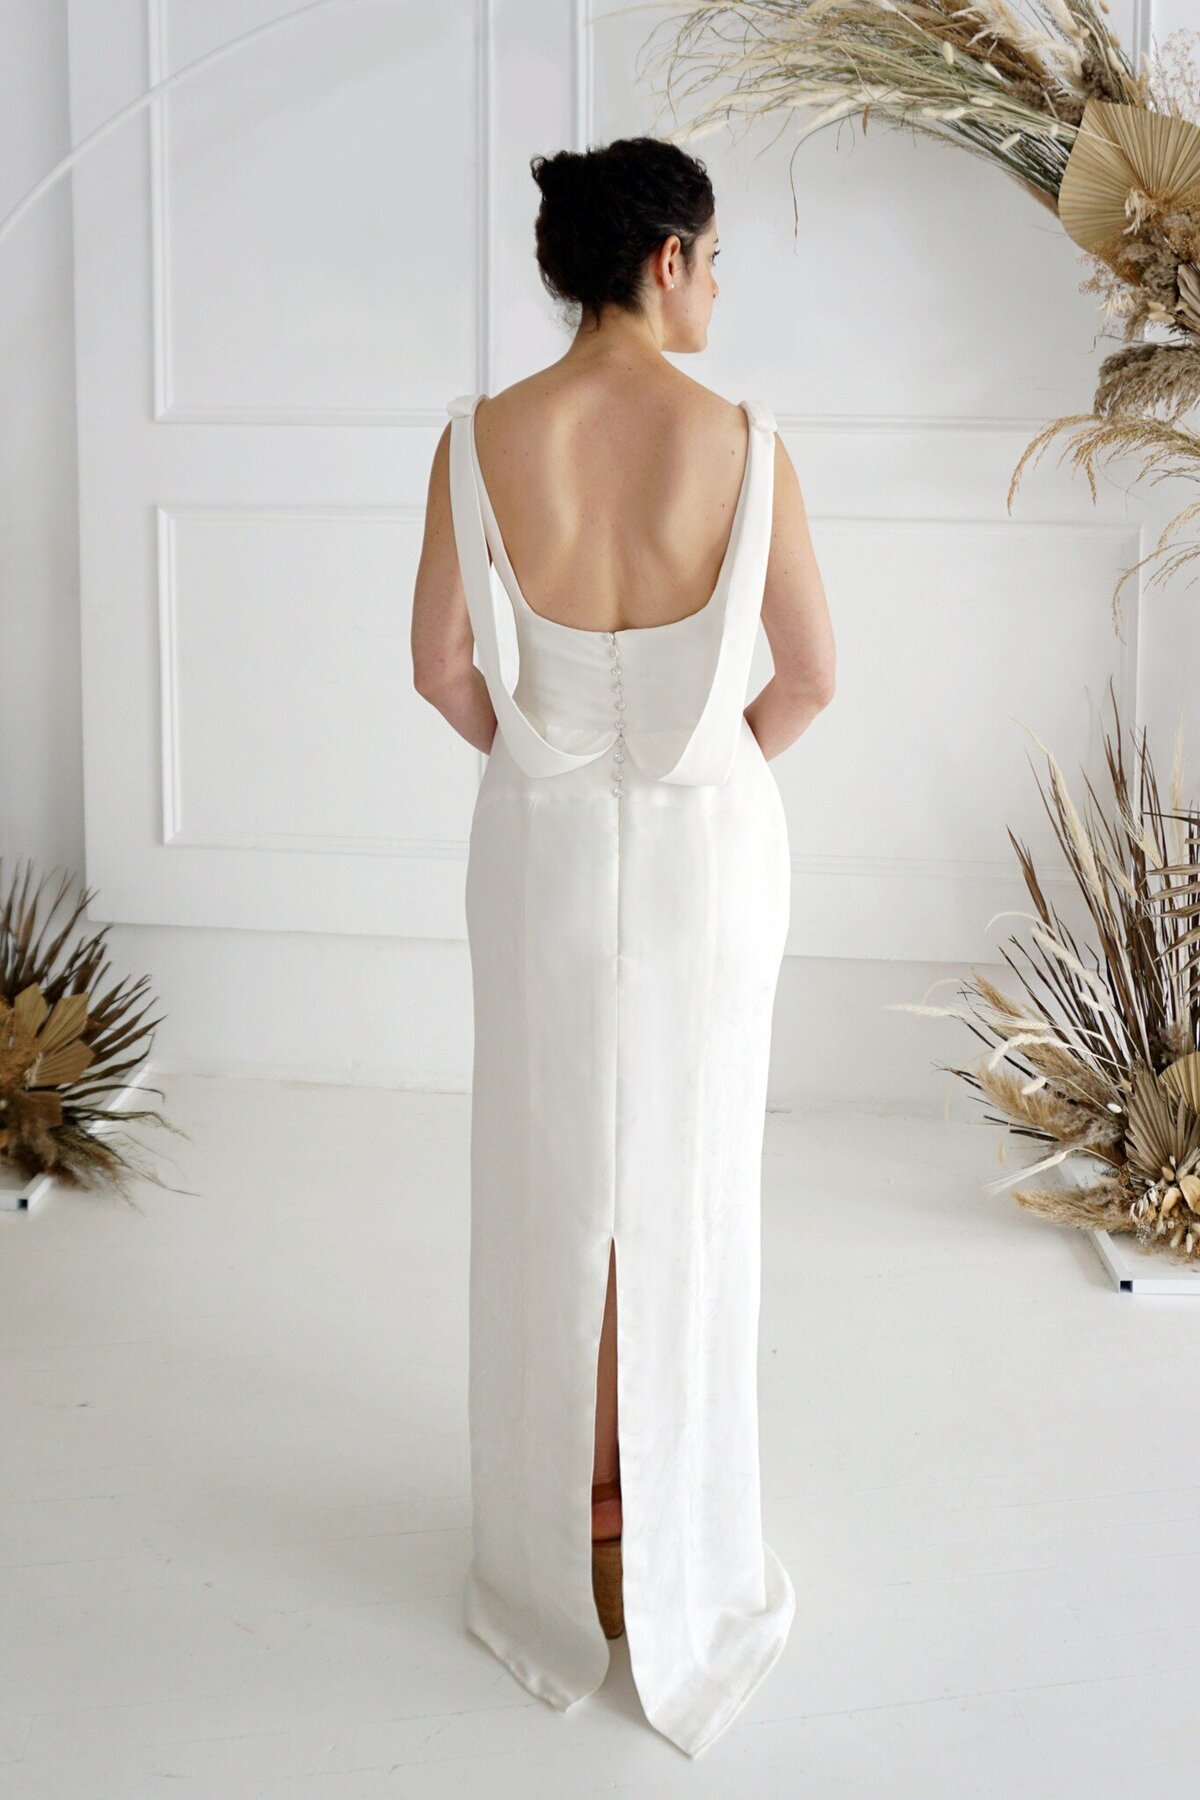 The back of the Jealine wedding dress style with the detachable trains removed showcases  the column silhouette of the skirt.